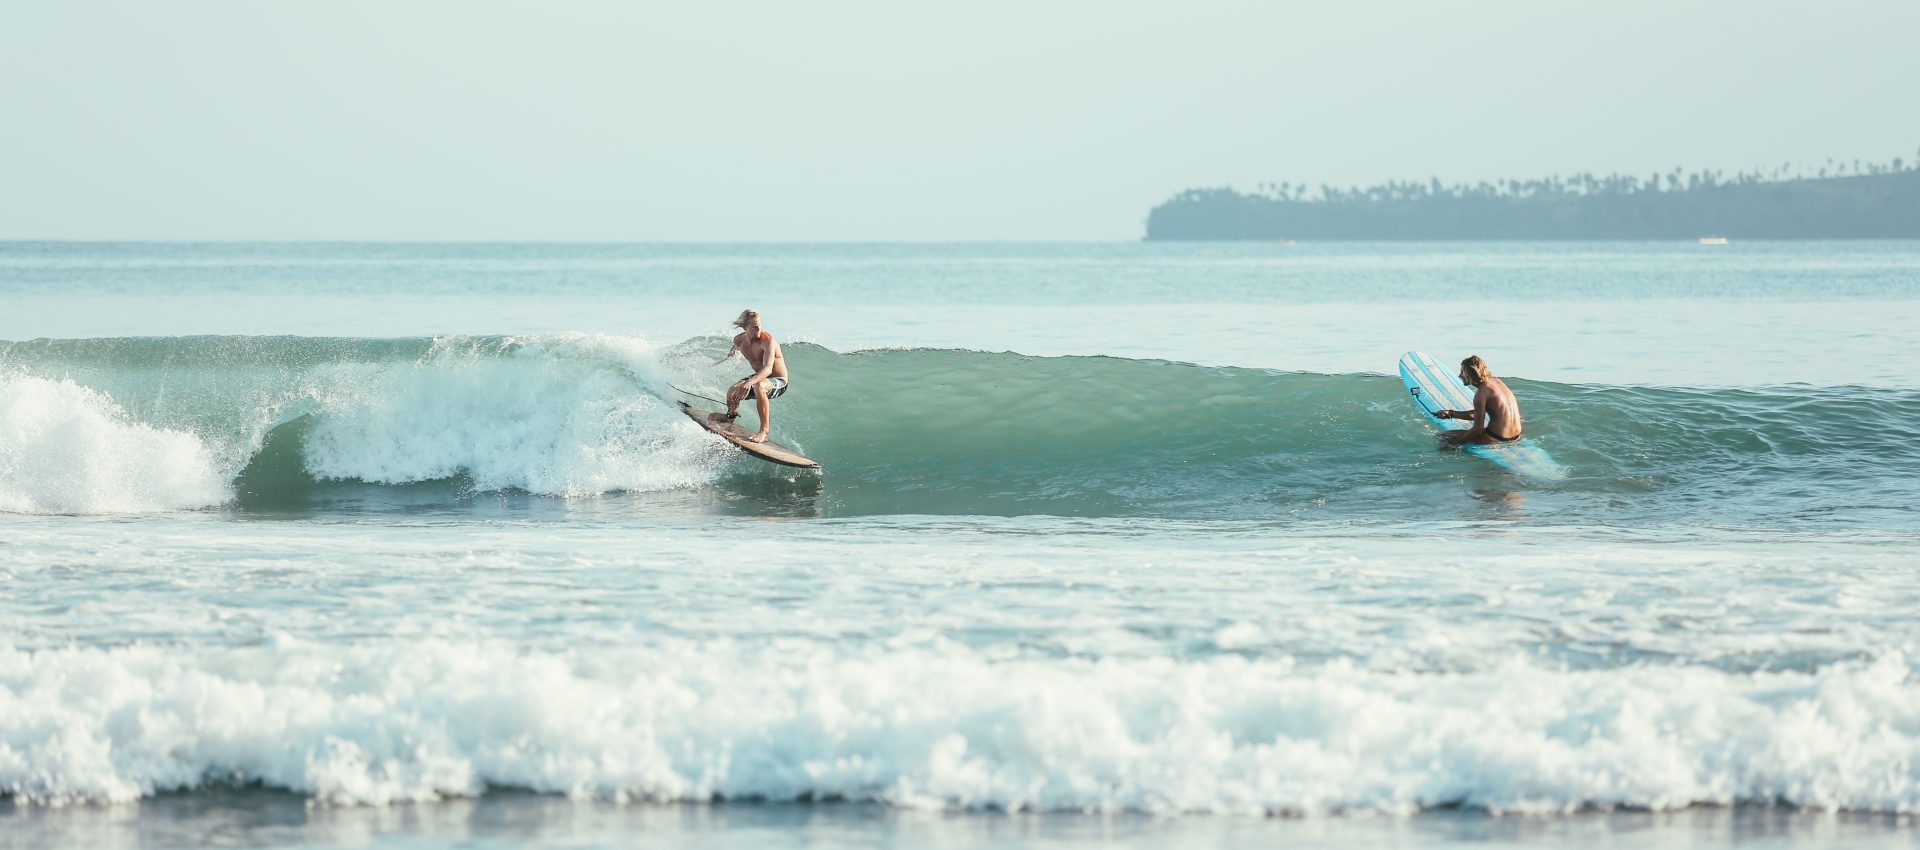 Cemetery is always the favorite surf spot of the group, it provides perfect waves both for beginners and advanced surfers.